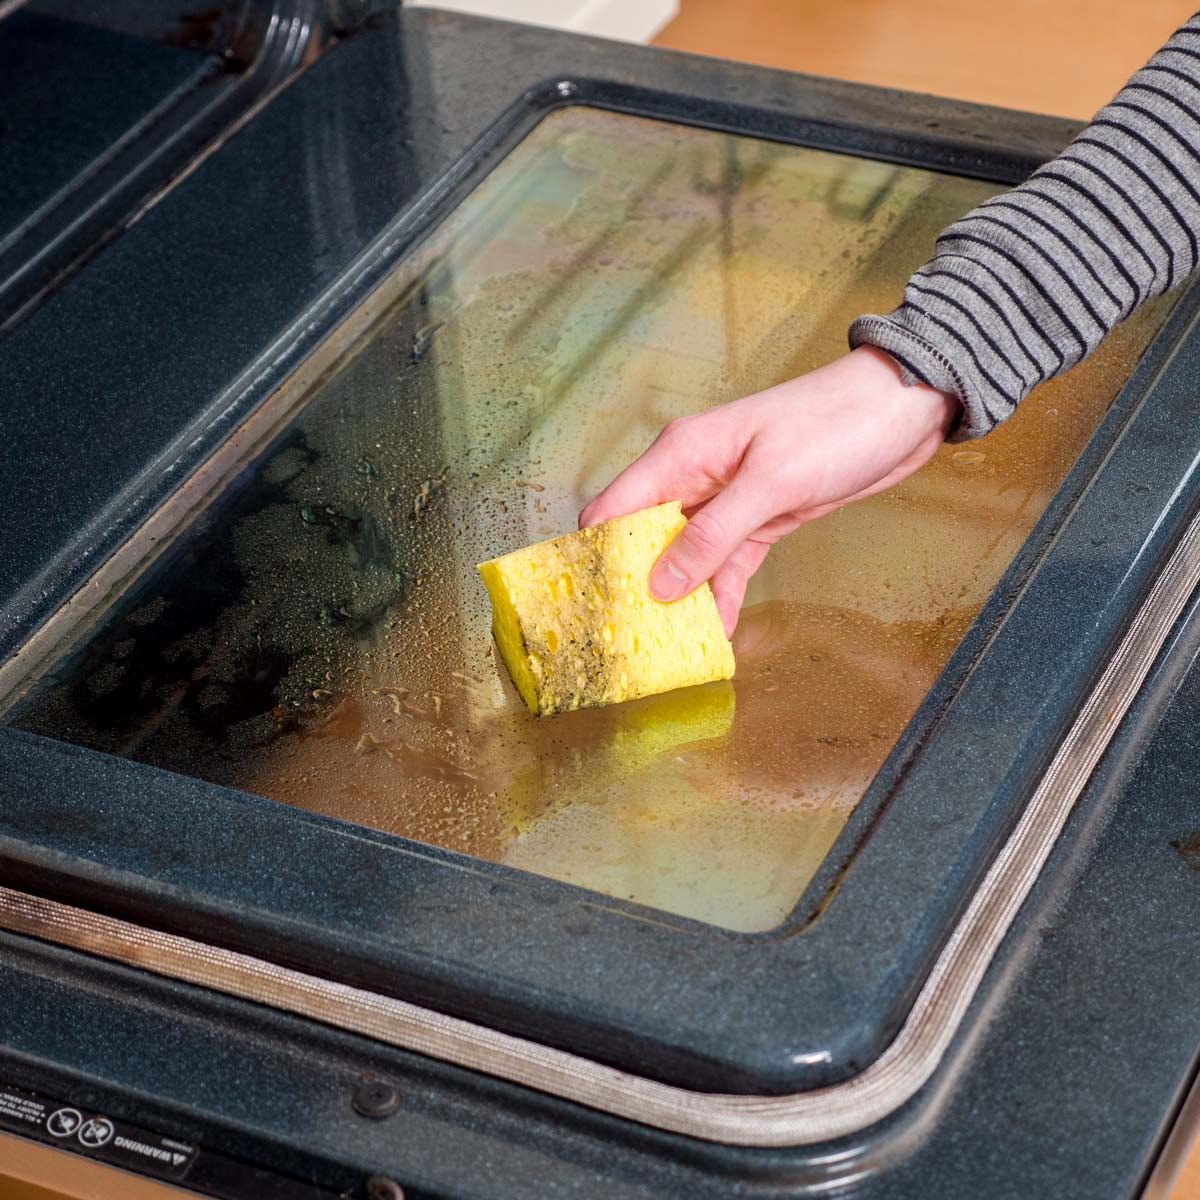 How to Steam Clean Your Oven